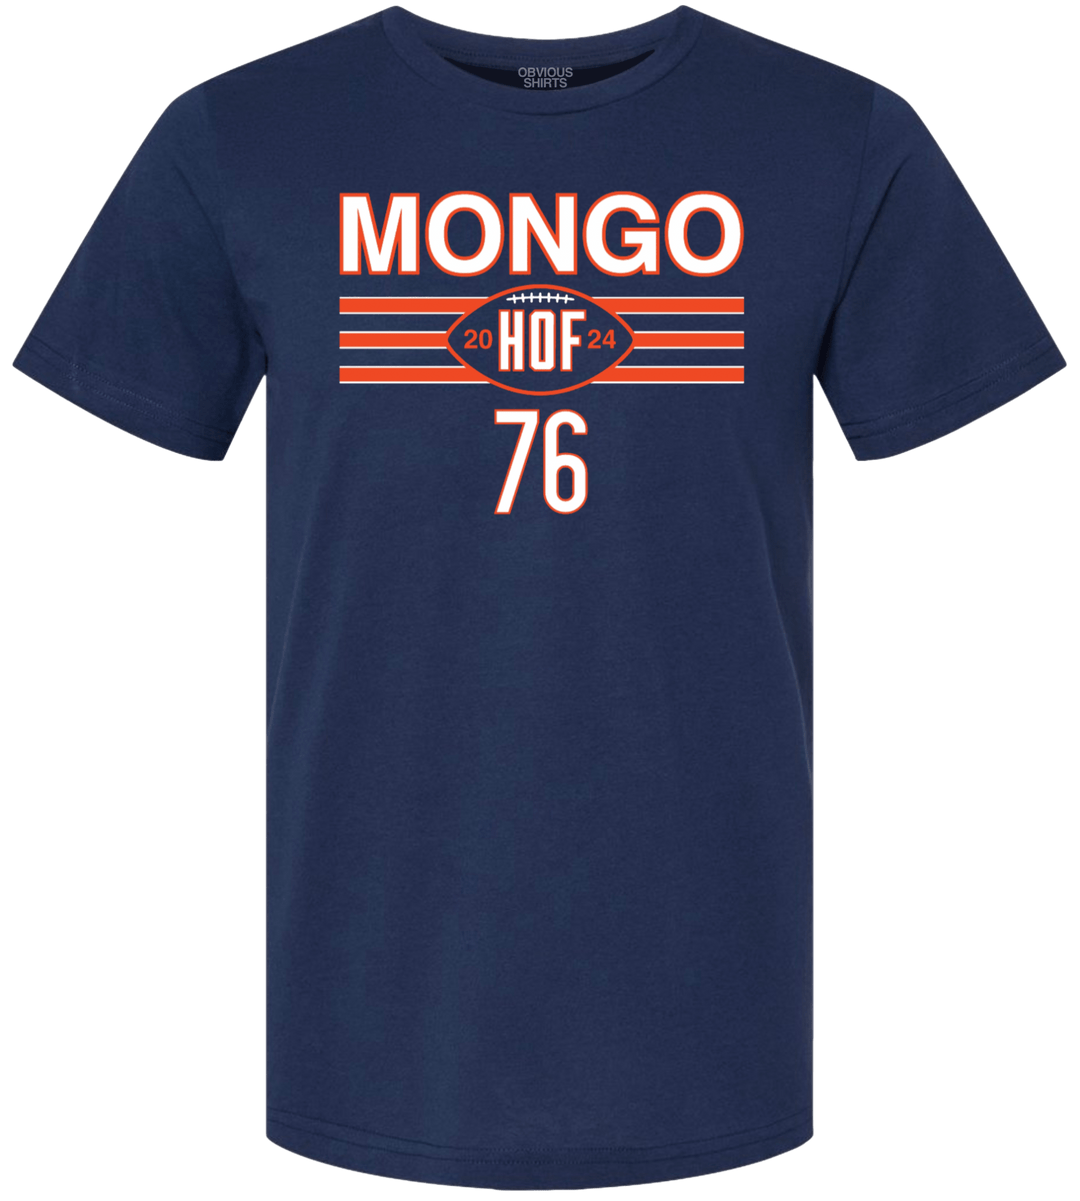 MONGO IS A HALL OF FAMER. - OBVIOUS SHIRTS